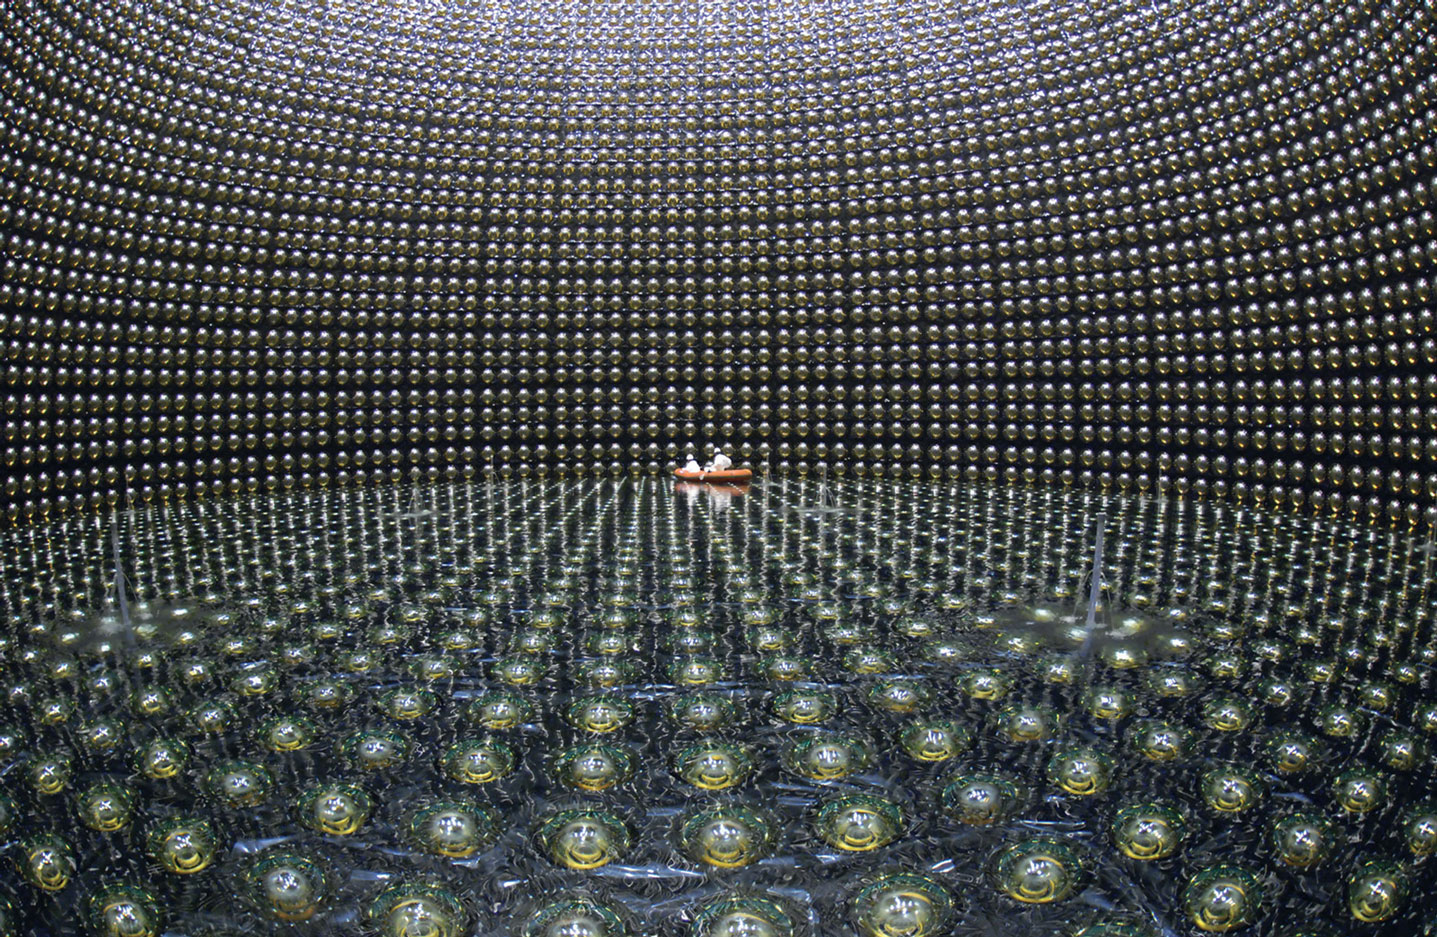 A photograph of a 50,000-ton water Cerenkov detector used for the University of Tokyo’s Super Kamioka Neutrino Detection Experiment. The observatory is a kilometer underground in a former mine located in Kamioka-cho, Gifu, Japan. 